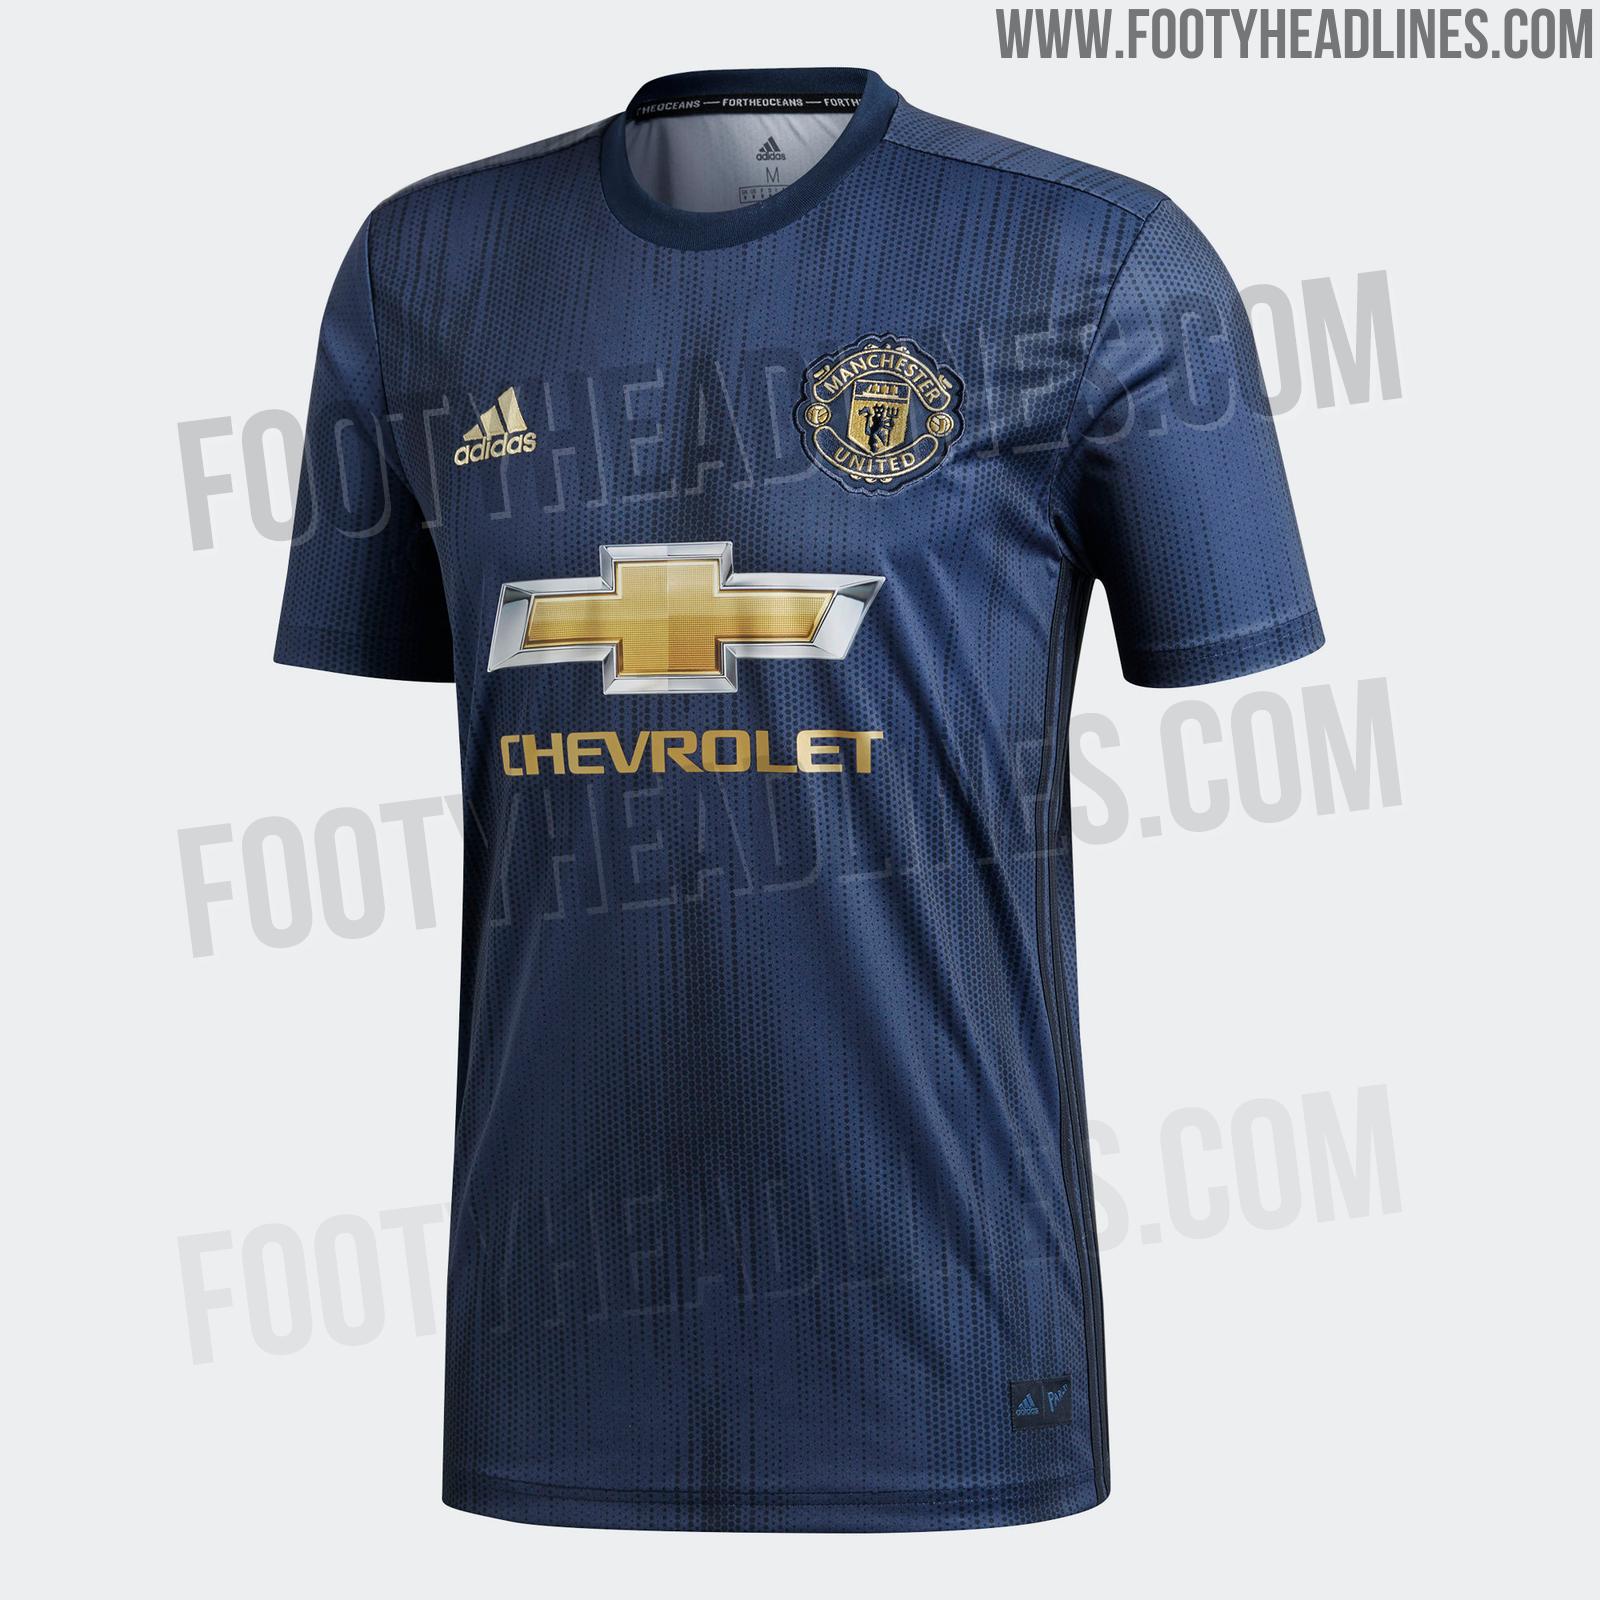 Manchester United 18-19 Third Kit Released - Footy Headlines